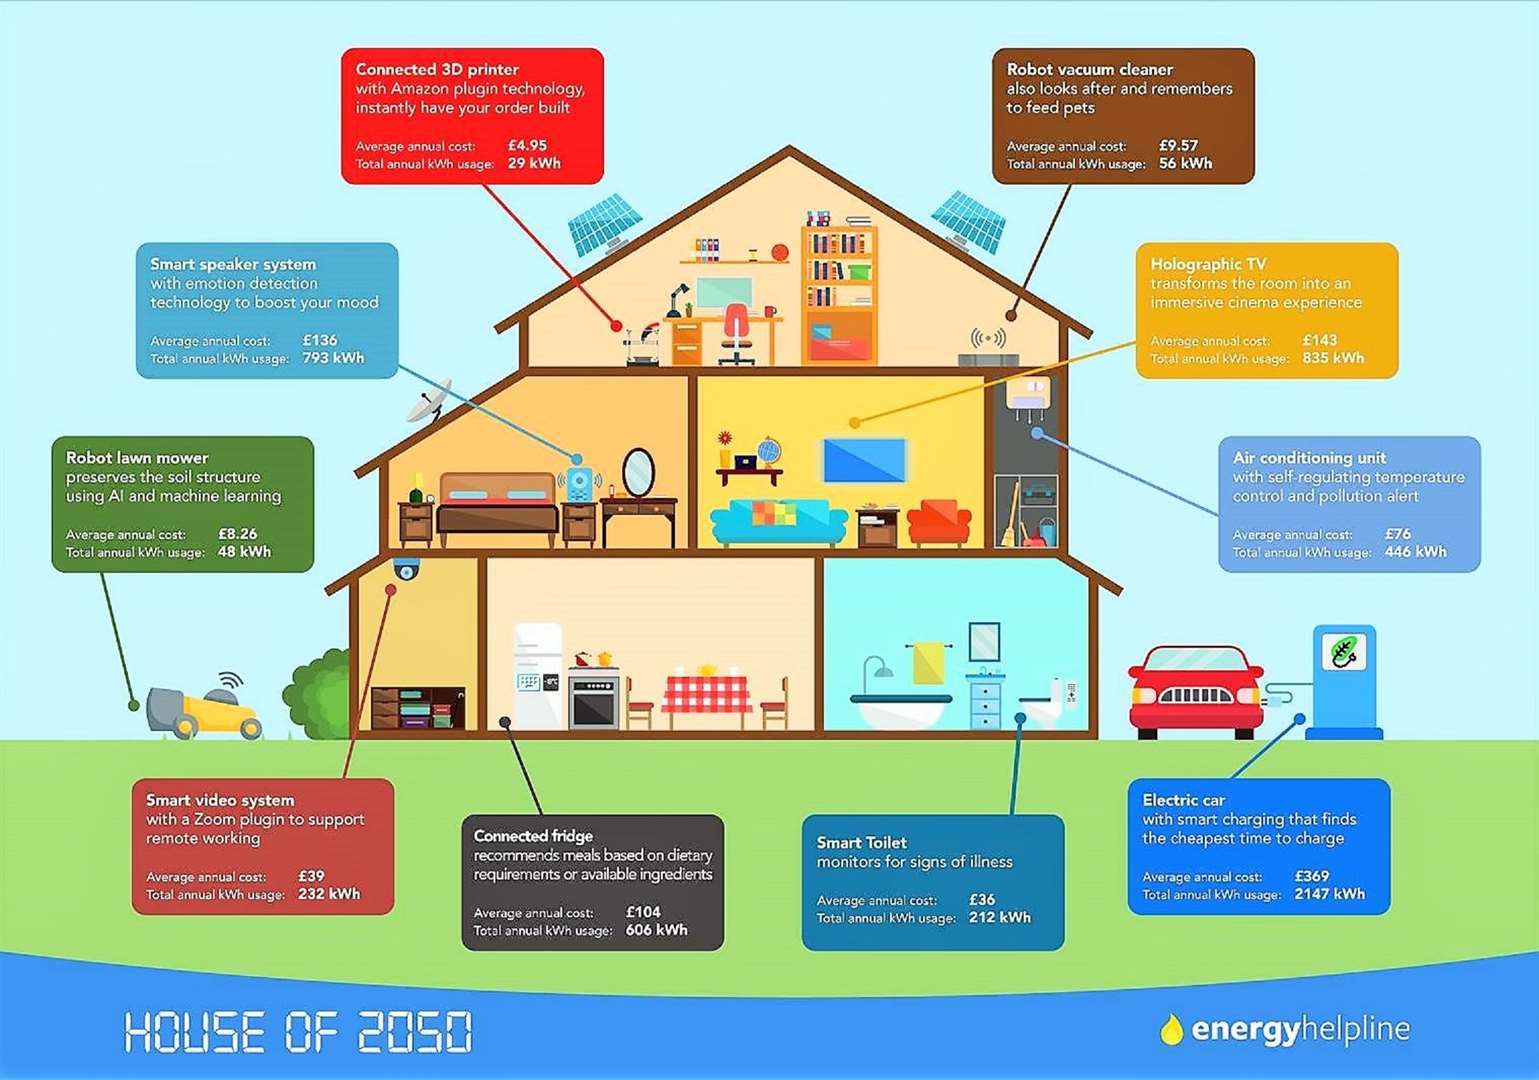 The house of 2050 and what it will cost to run.